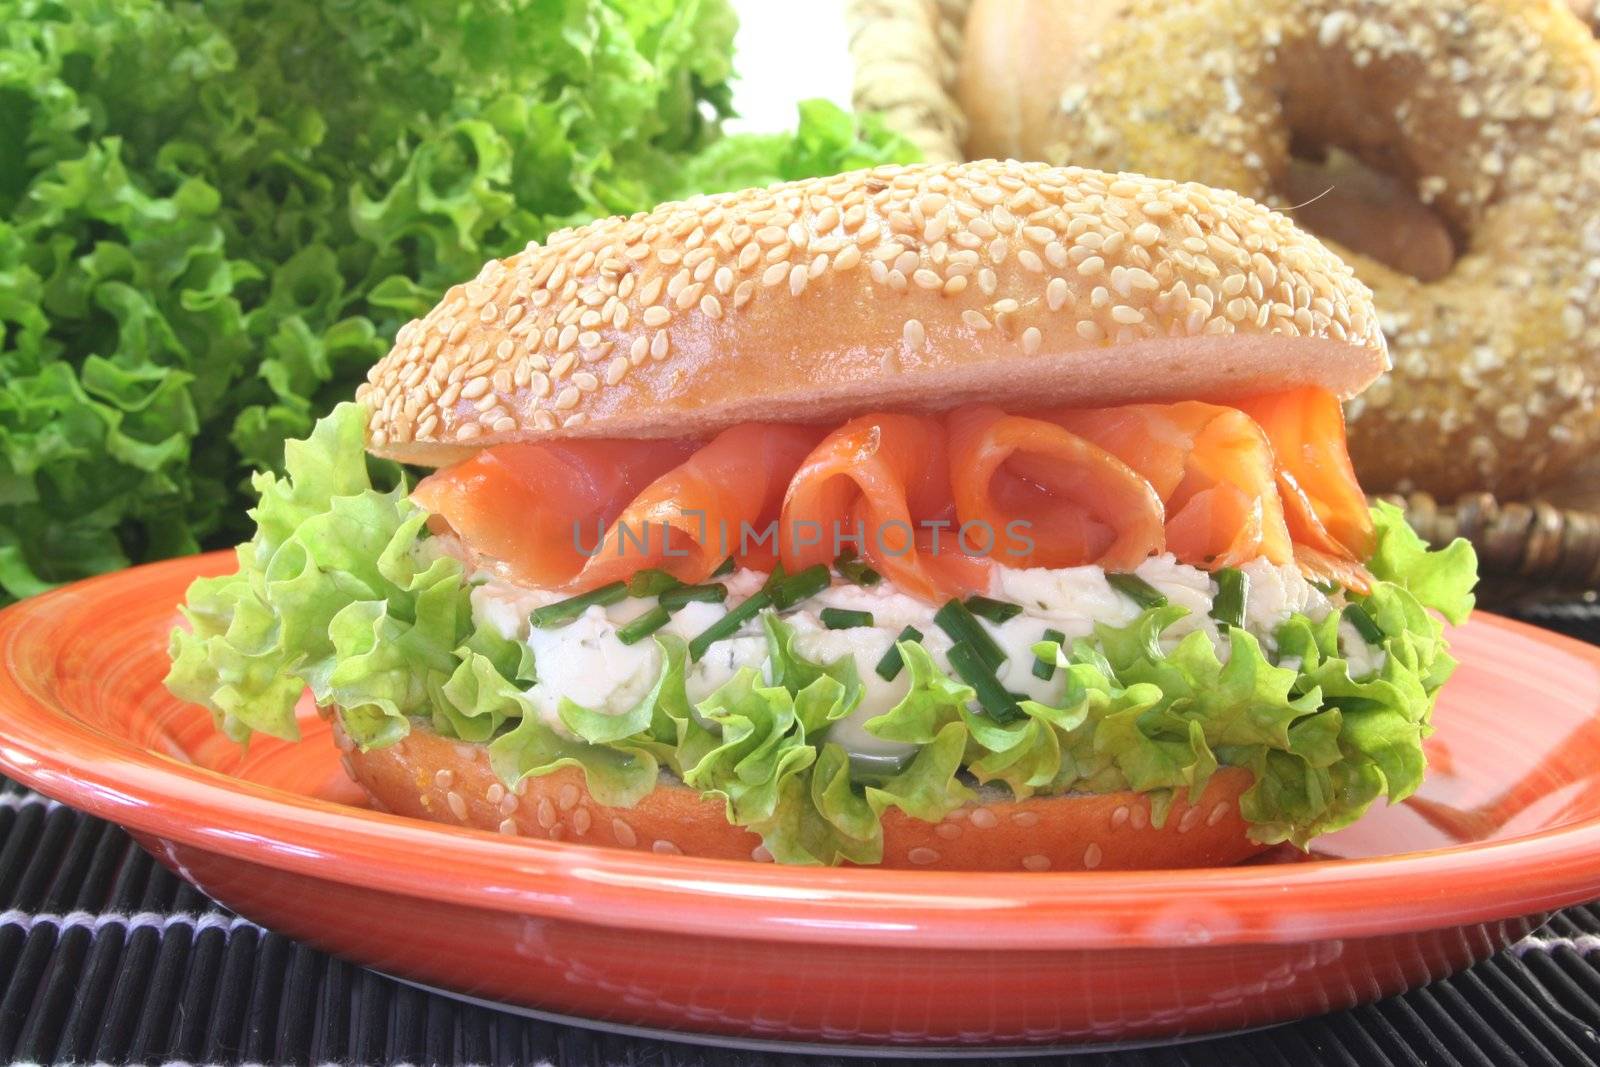 Sesame bagel with lettuce, cream cheese and salmon